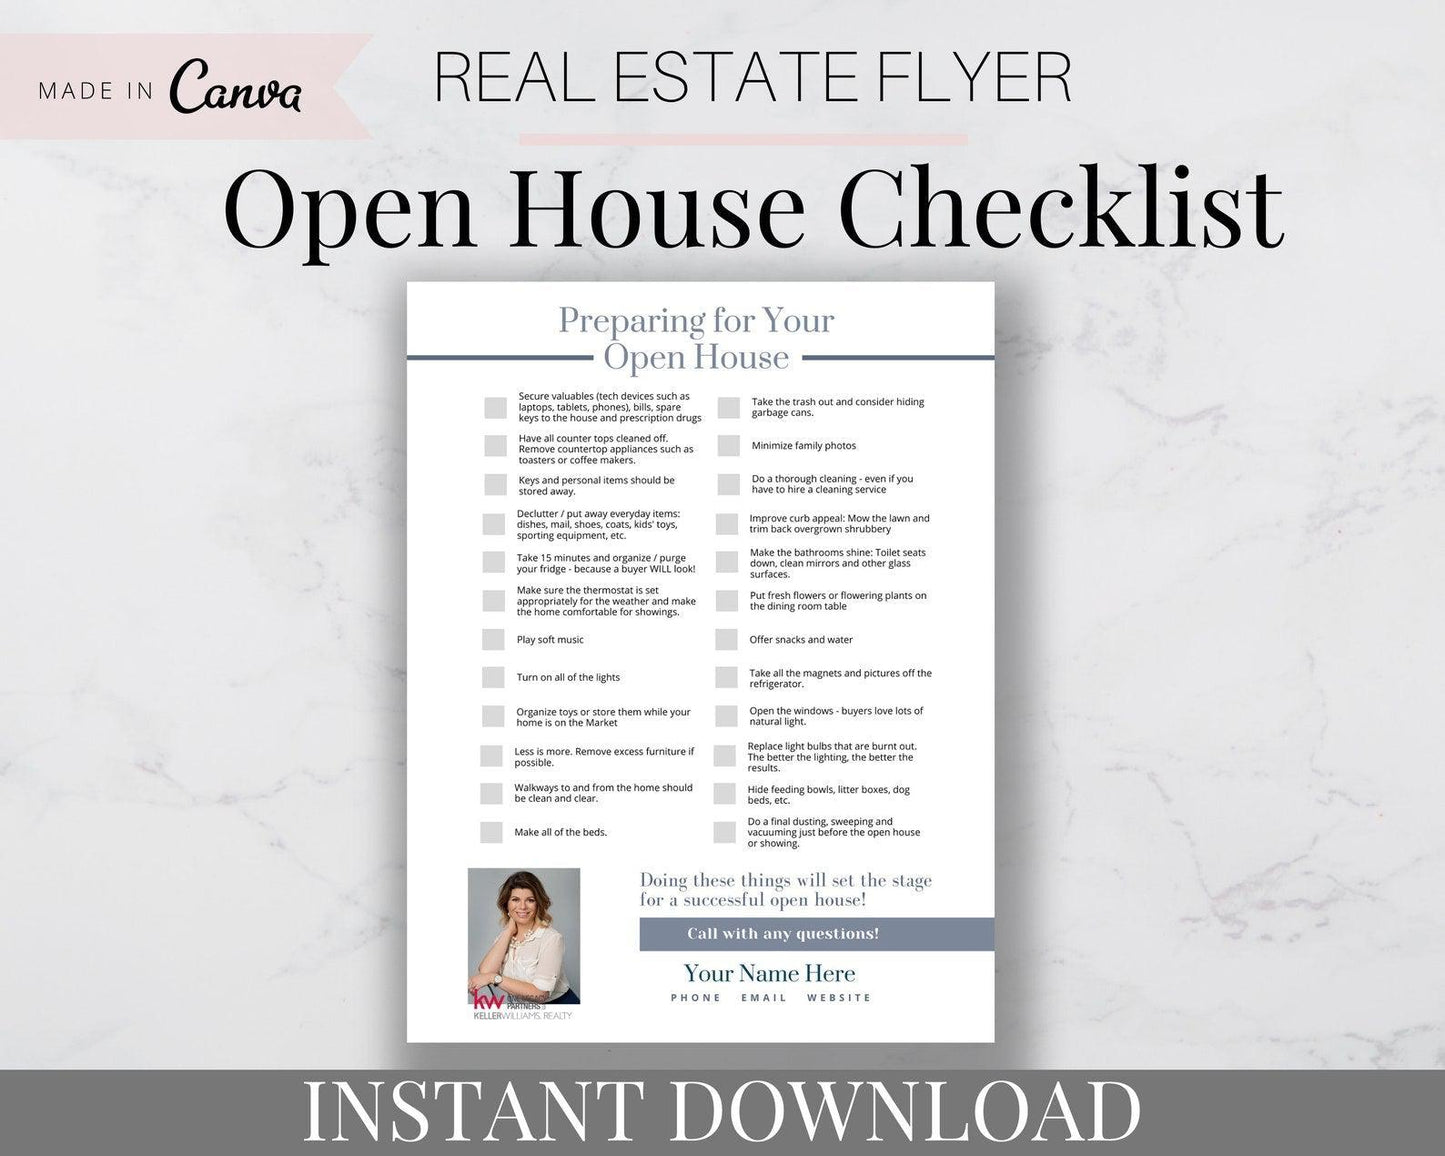 Real Estate Flyer - Open House Checklist for Realtors/Agents to Handout to Home Sellers so they can Prepare for their Open House